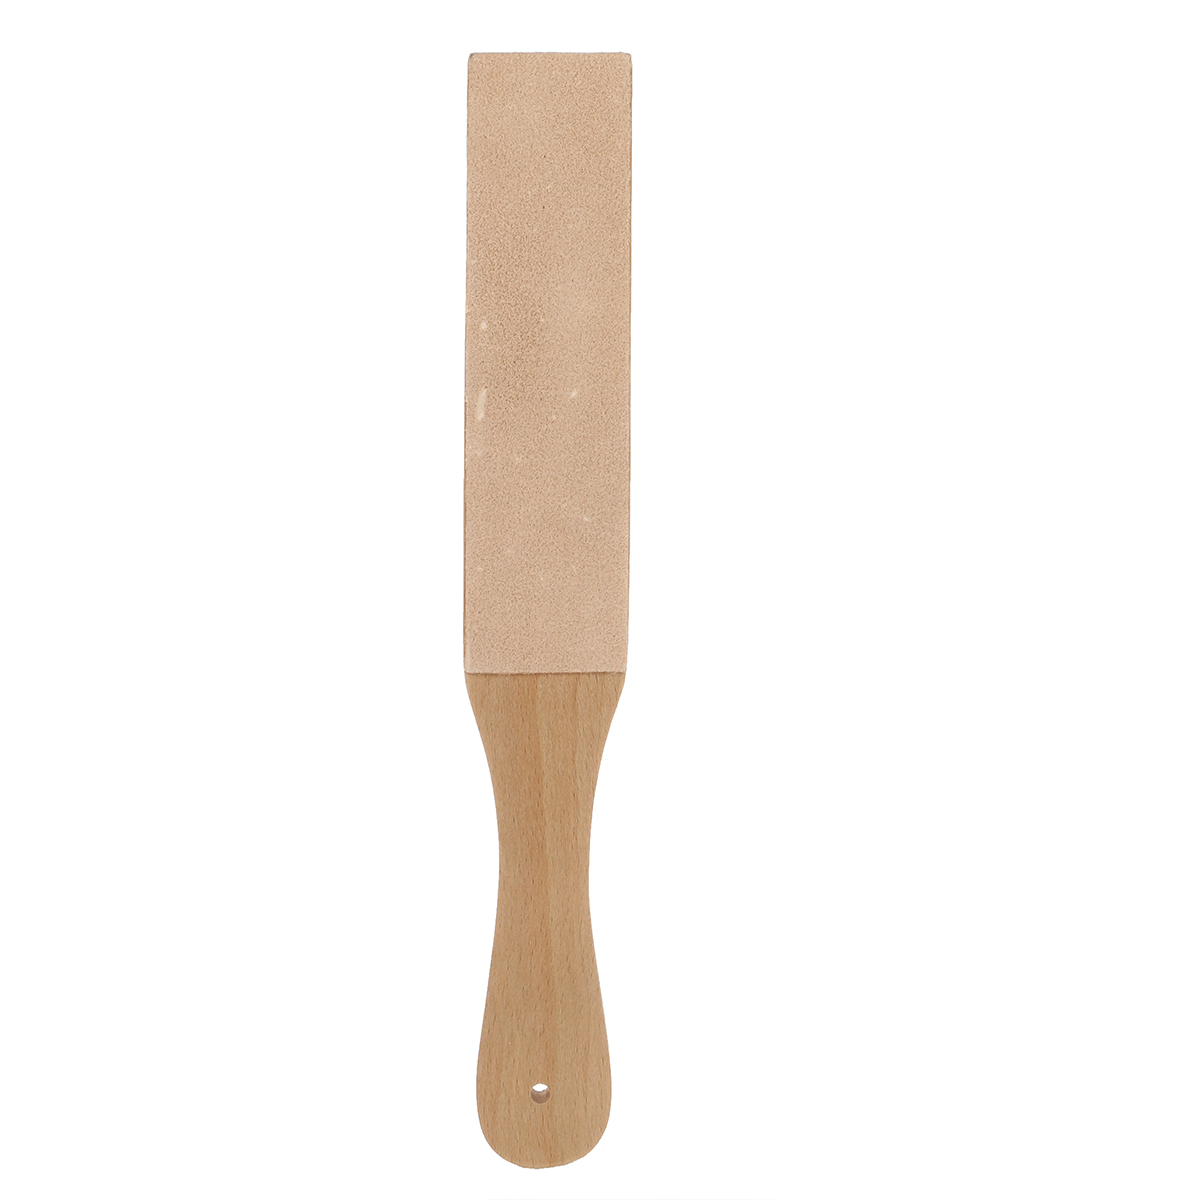 Dual-Sided-Leather-Blade-Strop-for-Razors-Sharpener--Polishing-Compounds-1428659-6